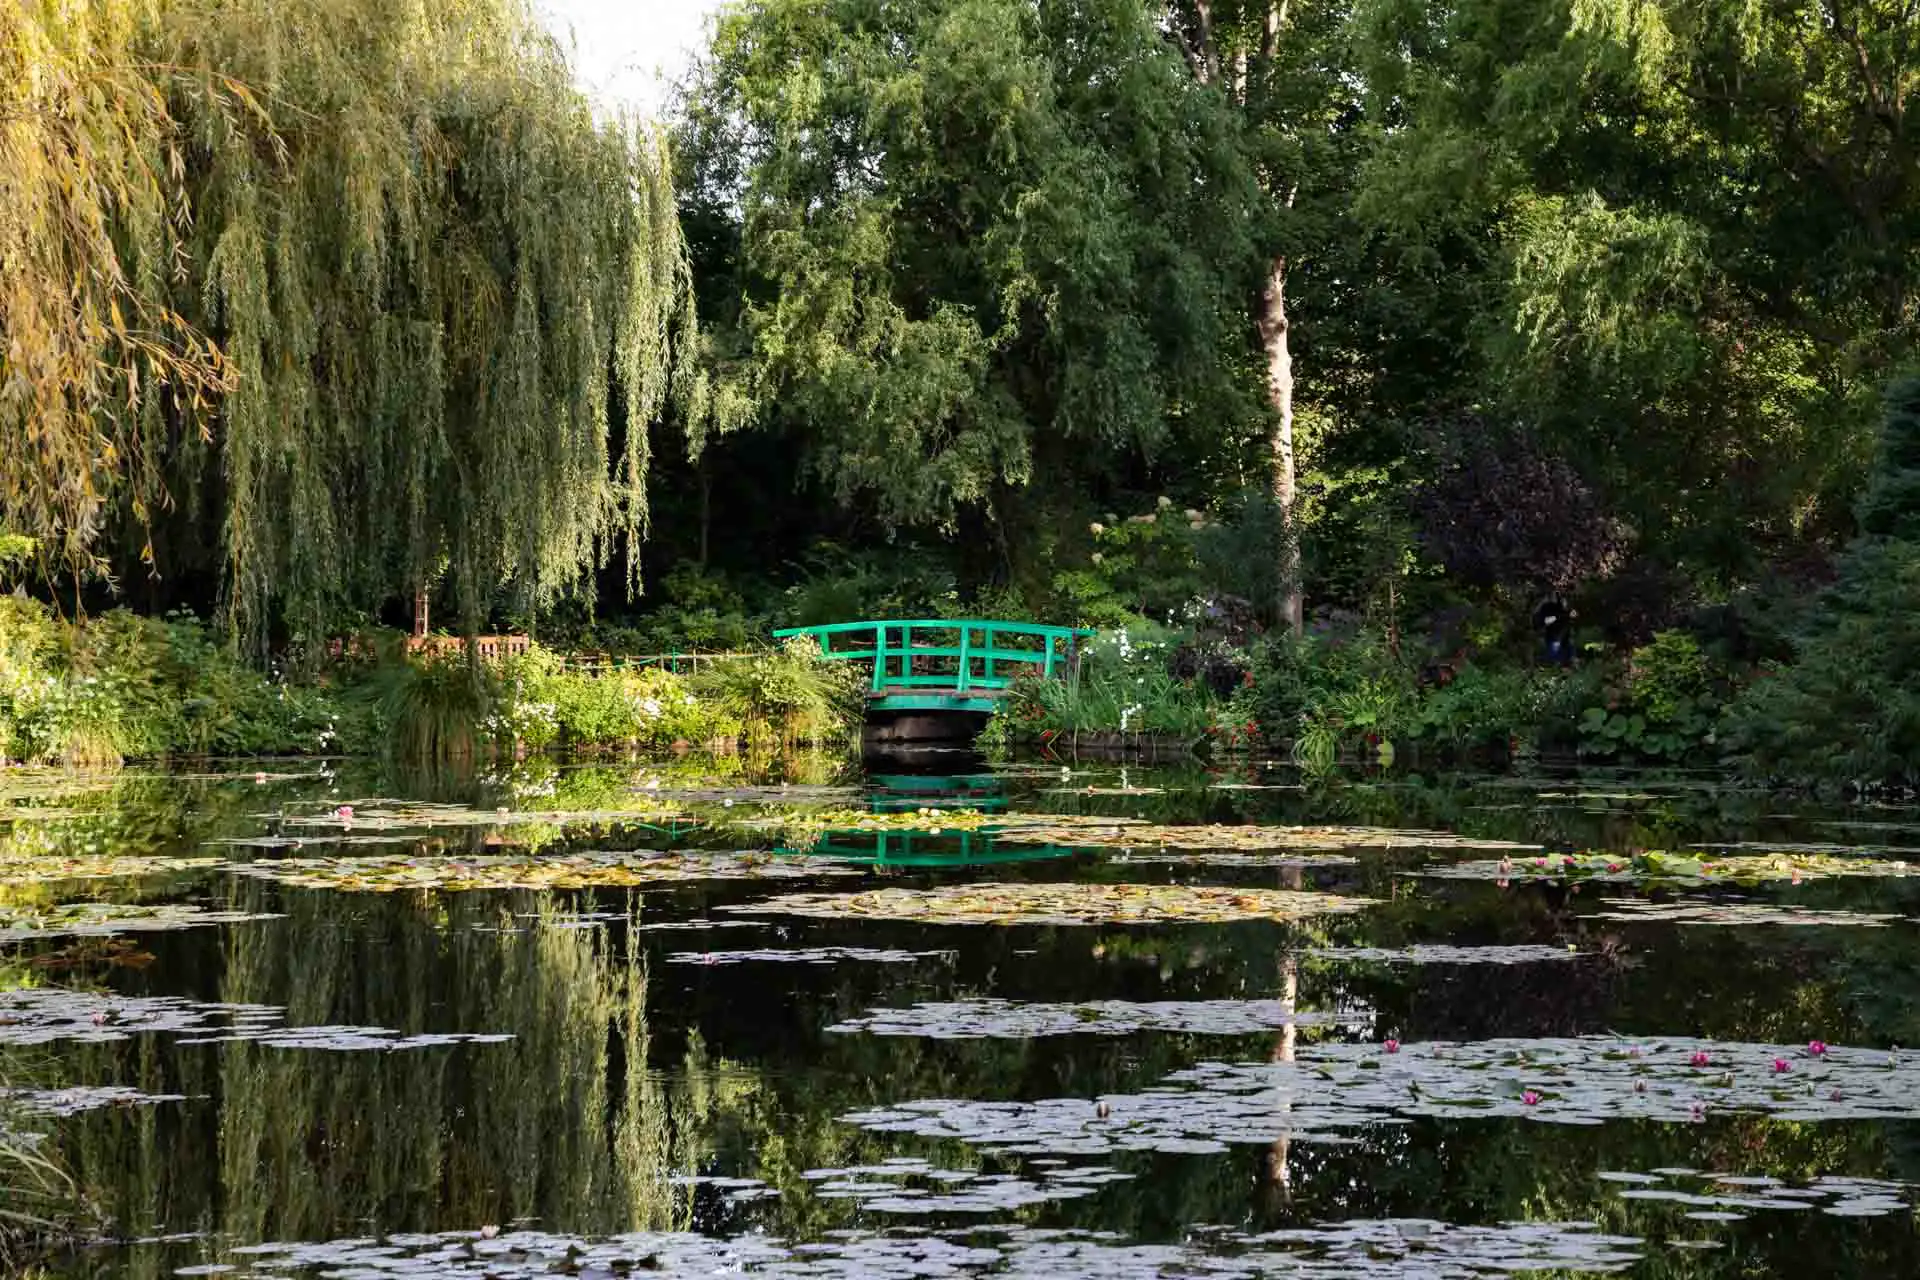 Monet's Water Garden in Giverny with green, arched bridge and lily pond